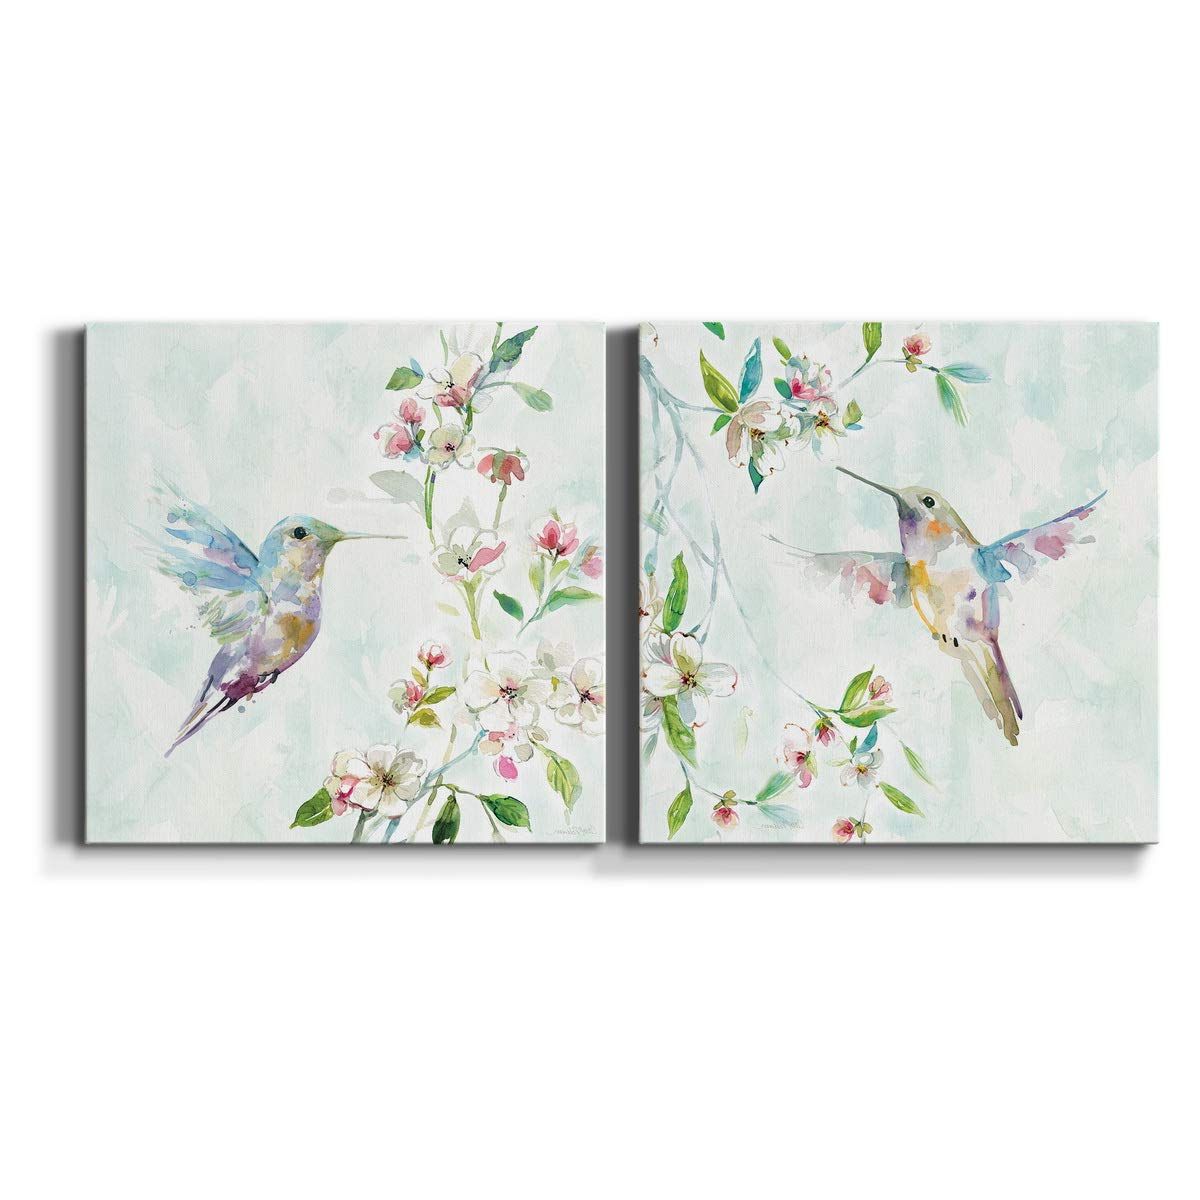 Hummingbird Wall Art For Trendy Amazon: Renditions Gallery Hummingbird Wall Art, Premium Gallery  Wrapped Canvas Decor, Ready To Hang, 16 In H X 16 In W, Made In America  Print : Everything Else (View 3 of 15)